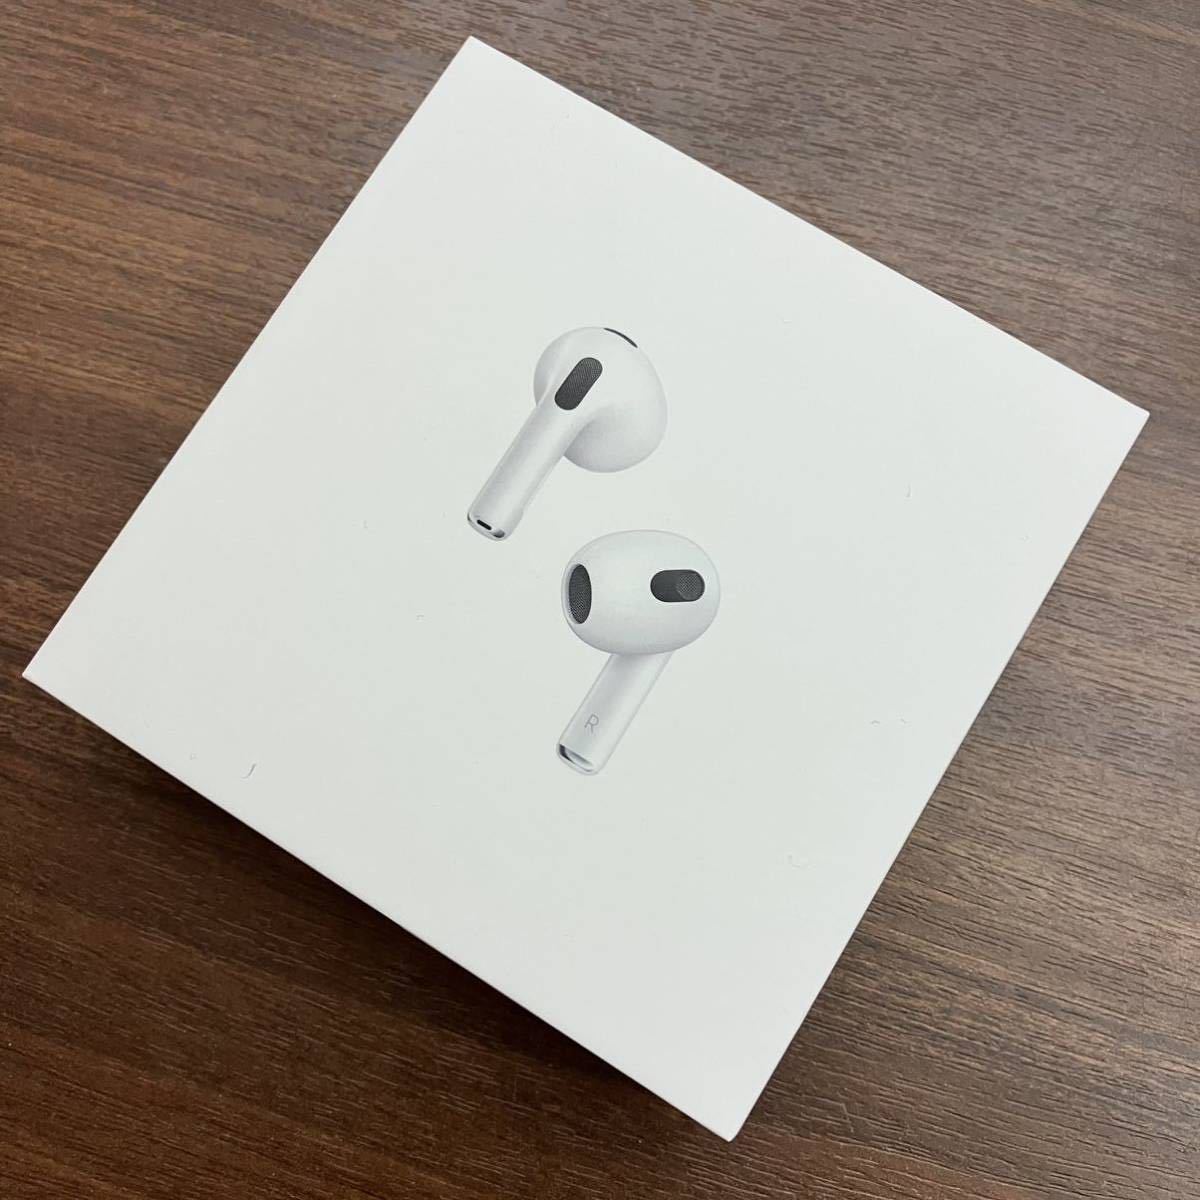 Apple AirPods 第3世代】未開封品☆エアーポッズ MME73J/A ワイヤレス